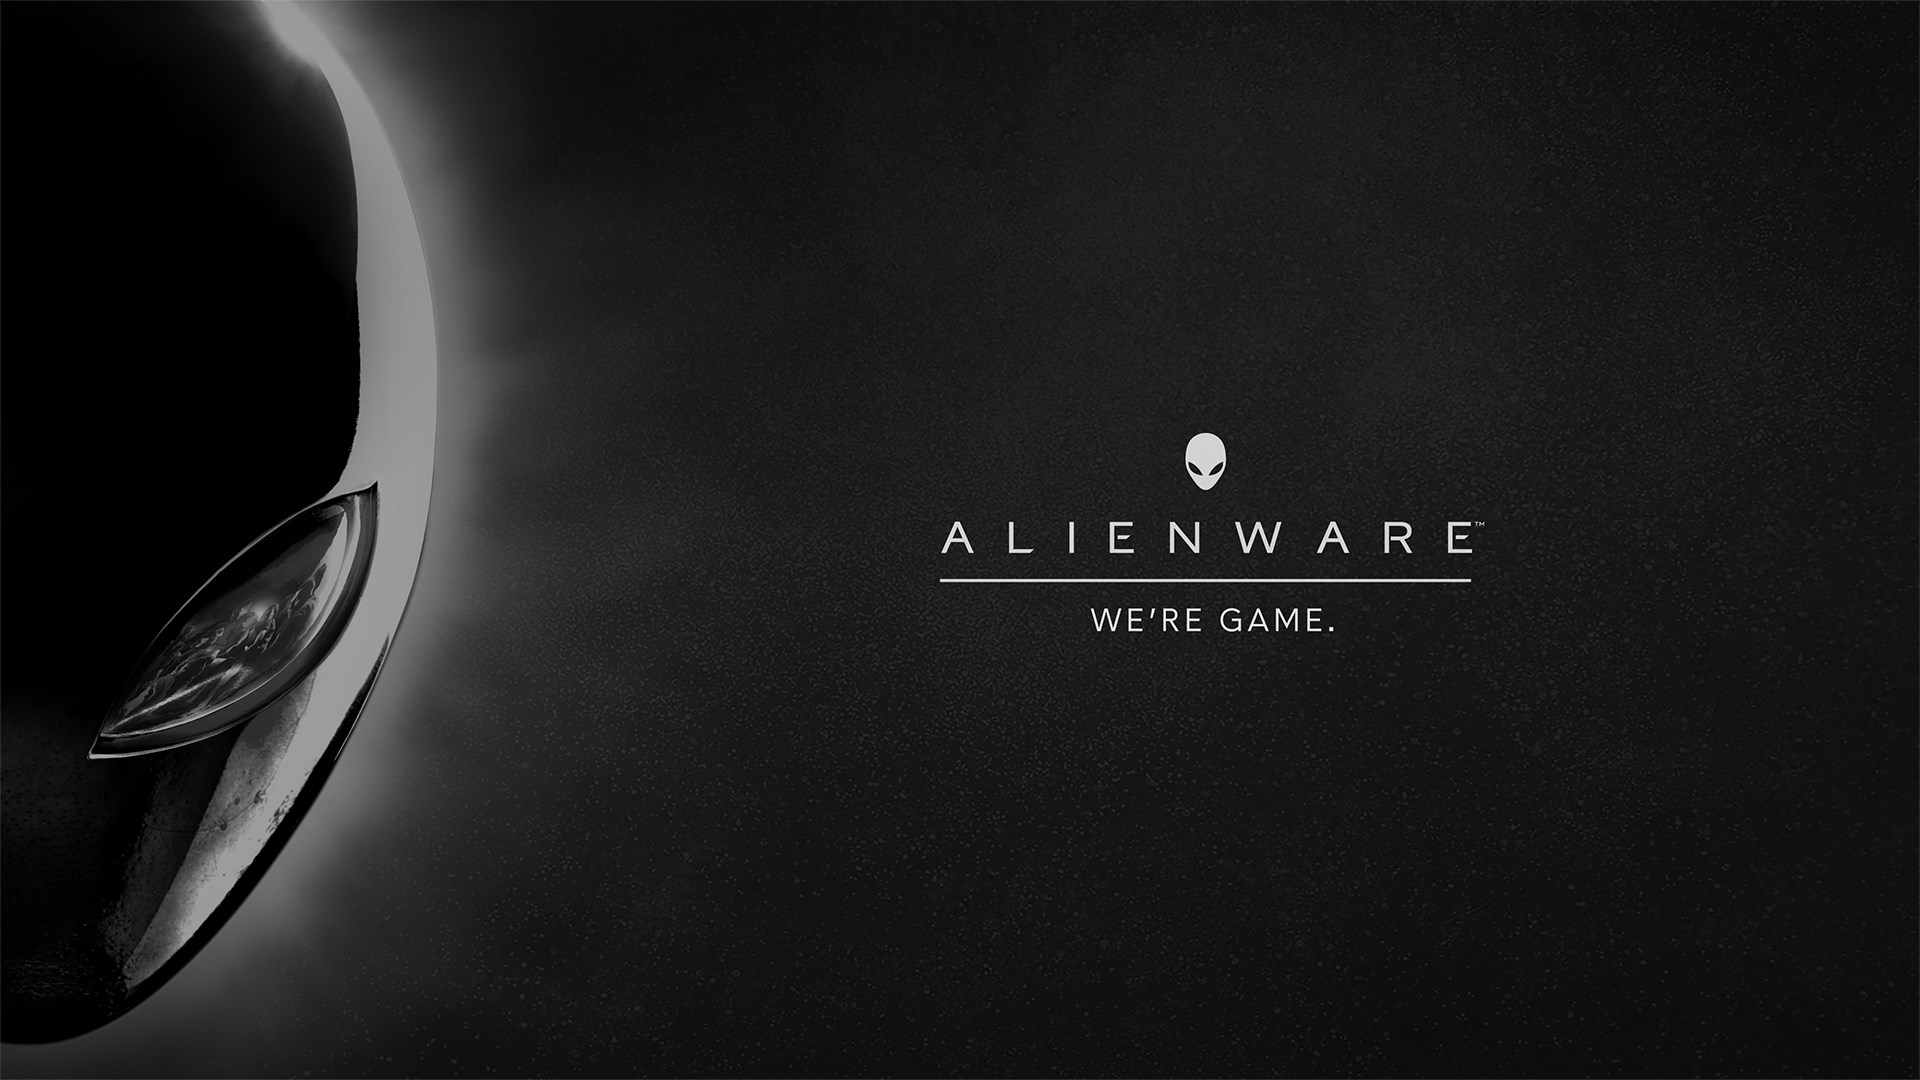 Alienware Arena Is Launching A New Algorithm To Prevent People Using Exploitative Scripts Alienware Arena